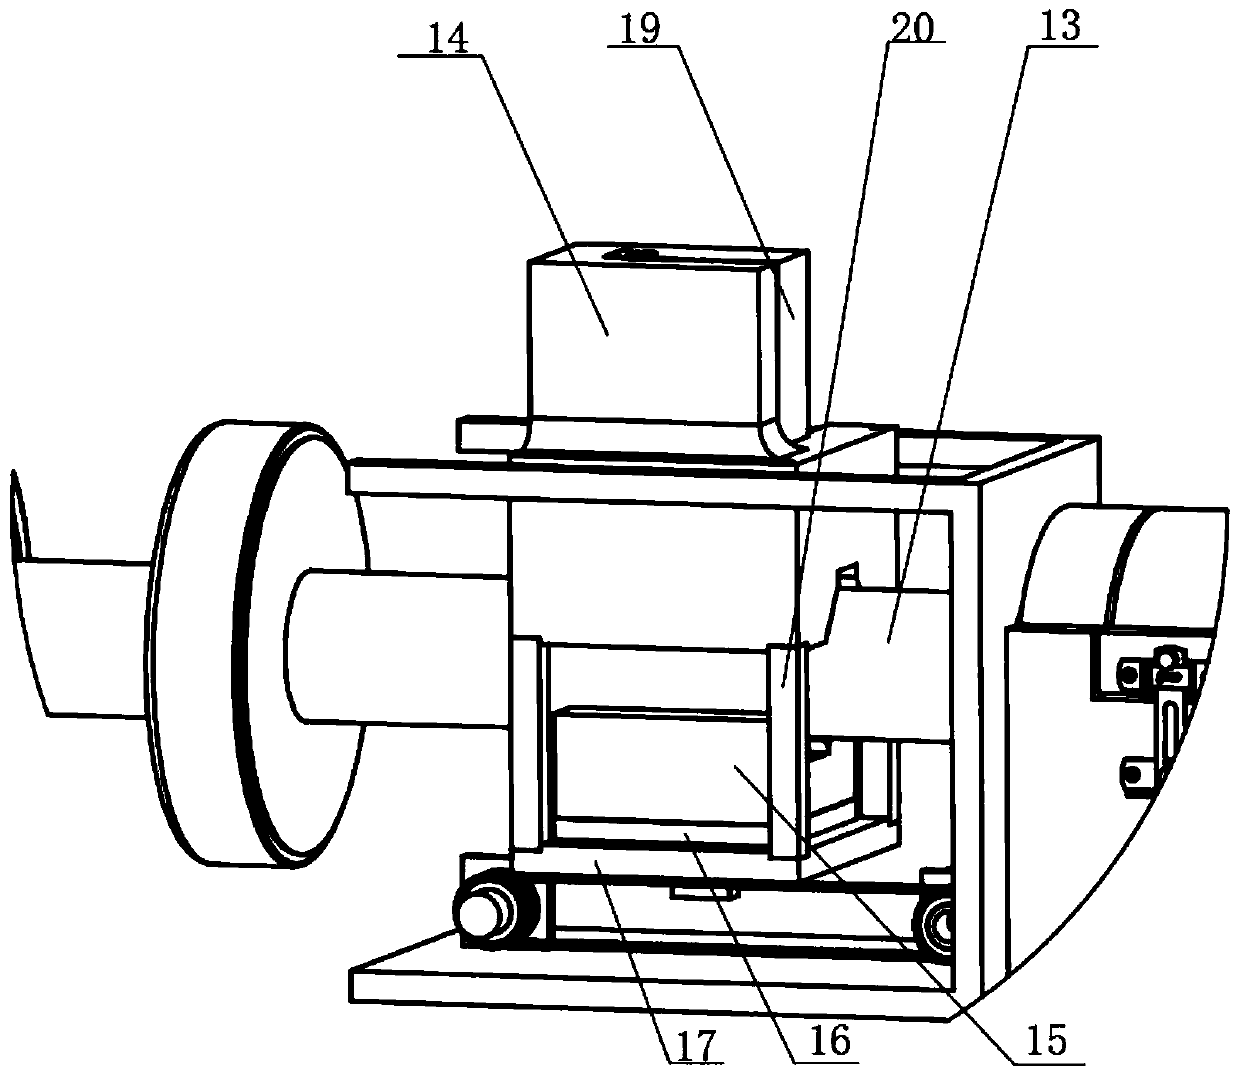 Vehicle brake drum surface total run-out detection device